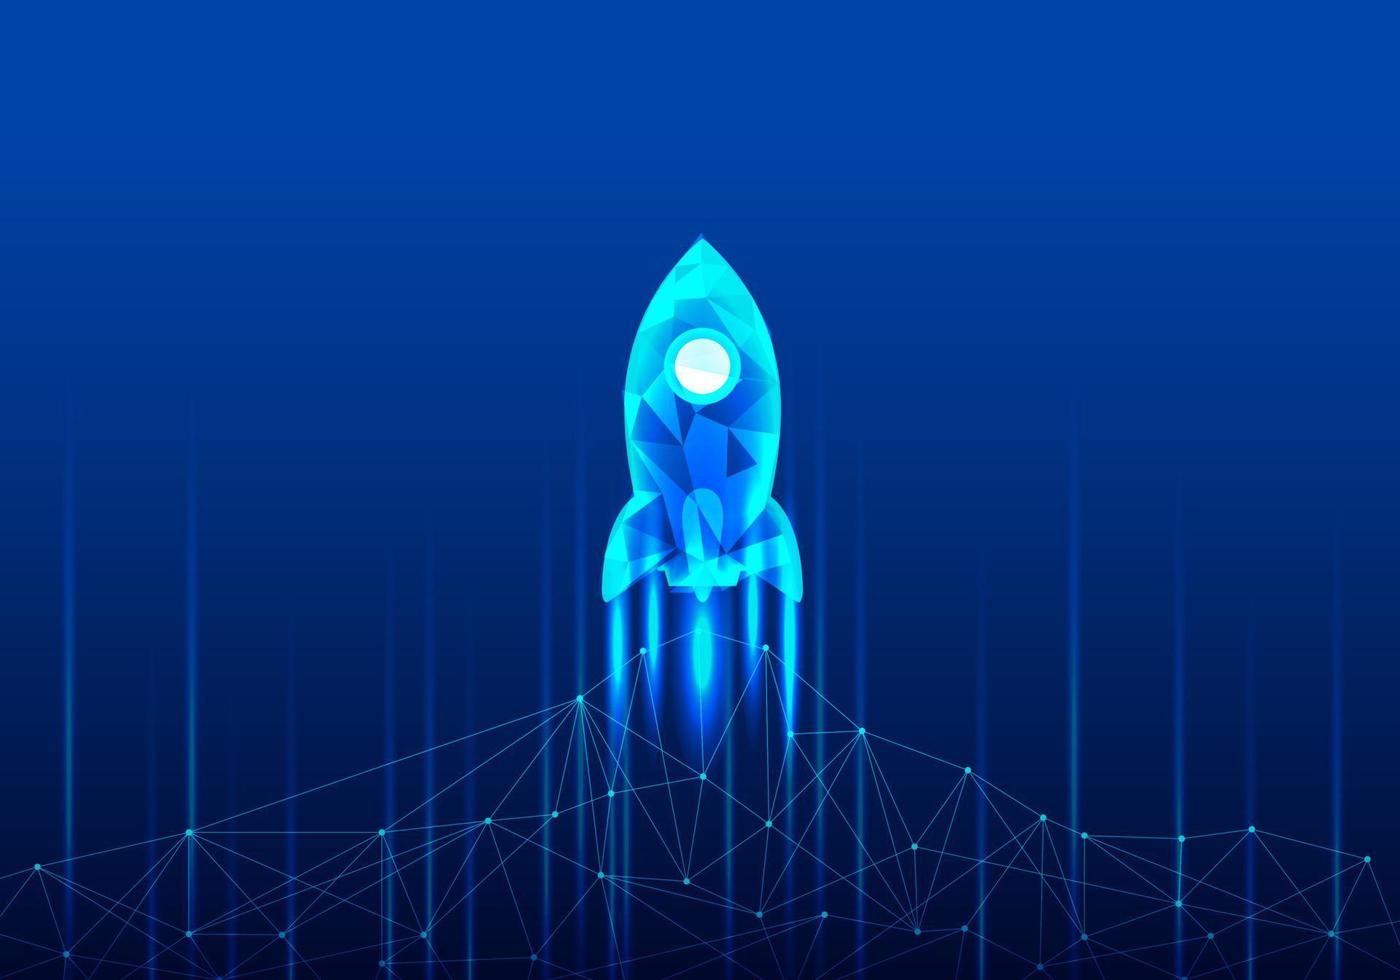 The rising rocket background indicates that wireless Internet connections are faster and easier for business or financial transactions requiring speed. vector